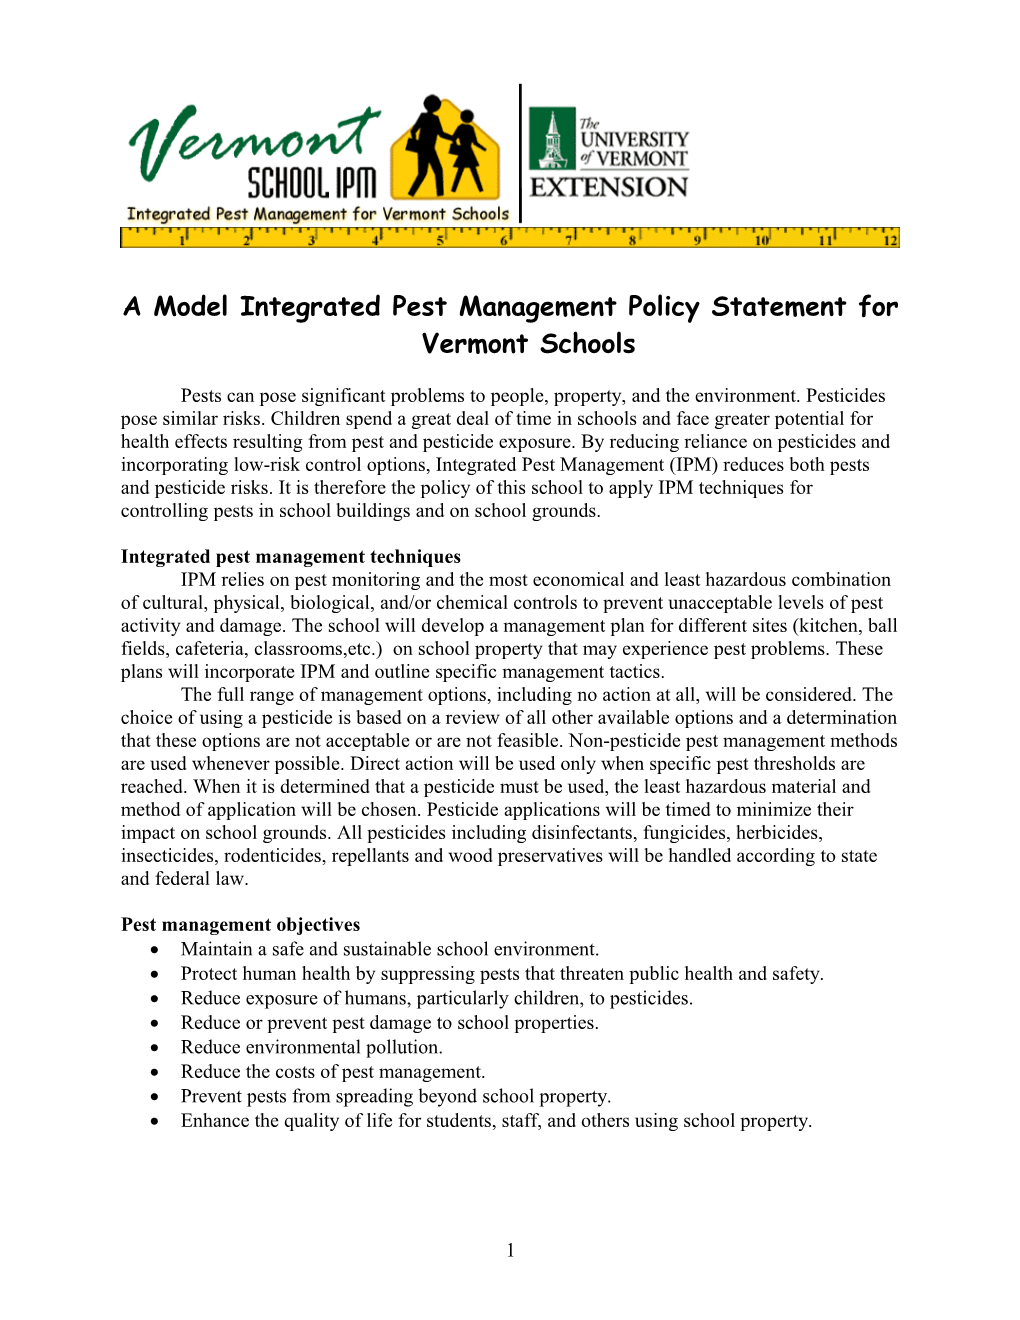 A Model Integrated Pest Management Policy Statement for Vermont Schools